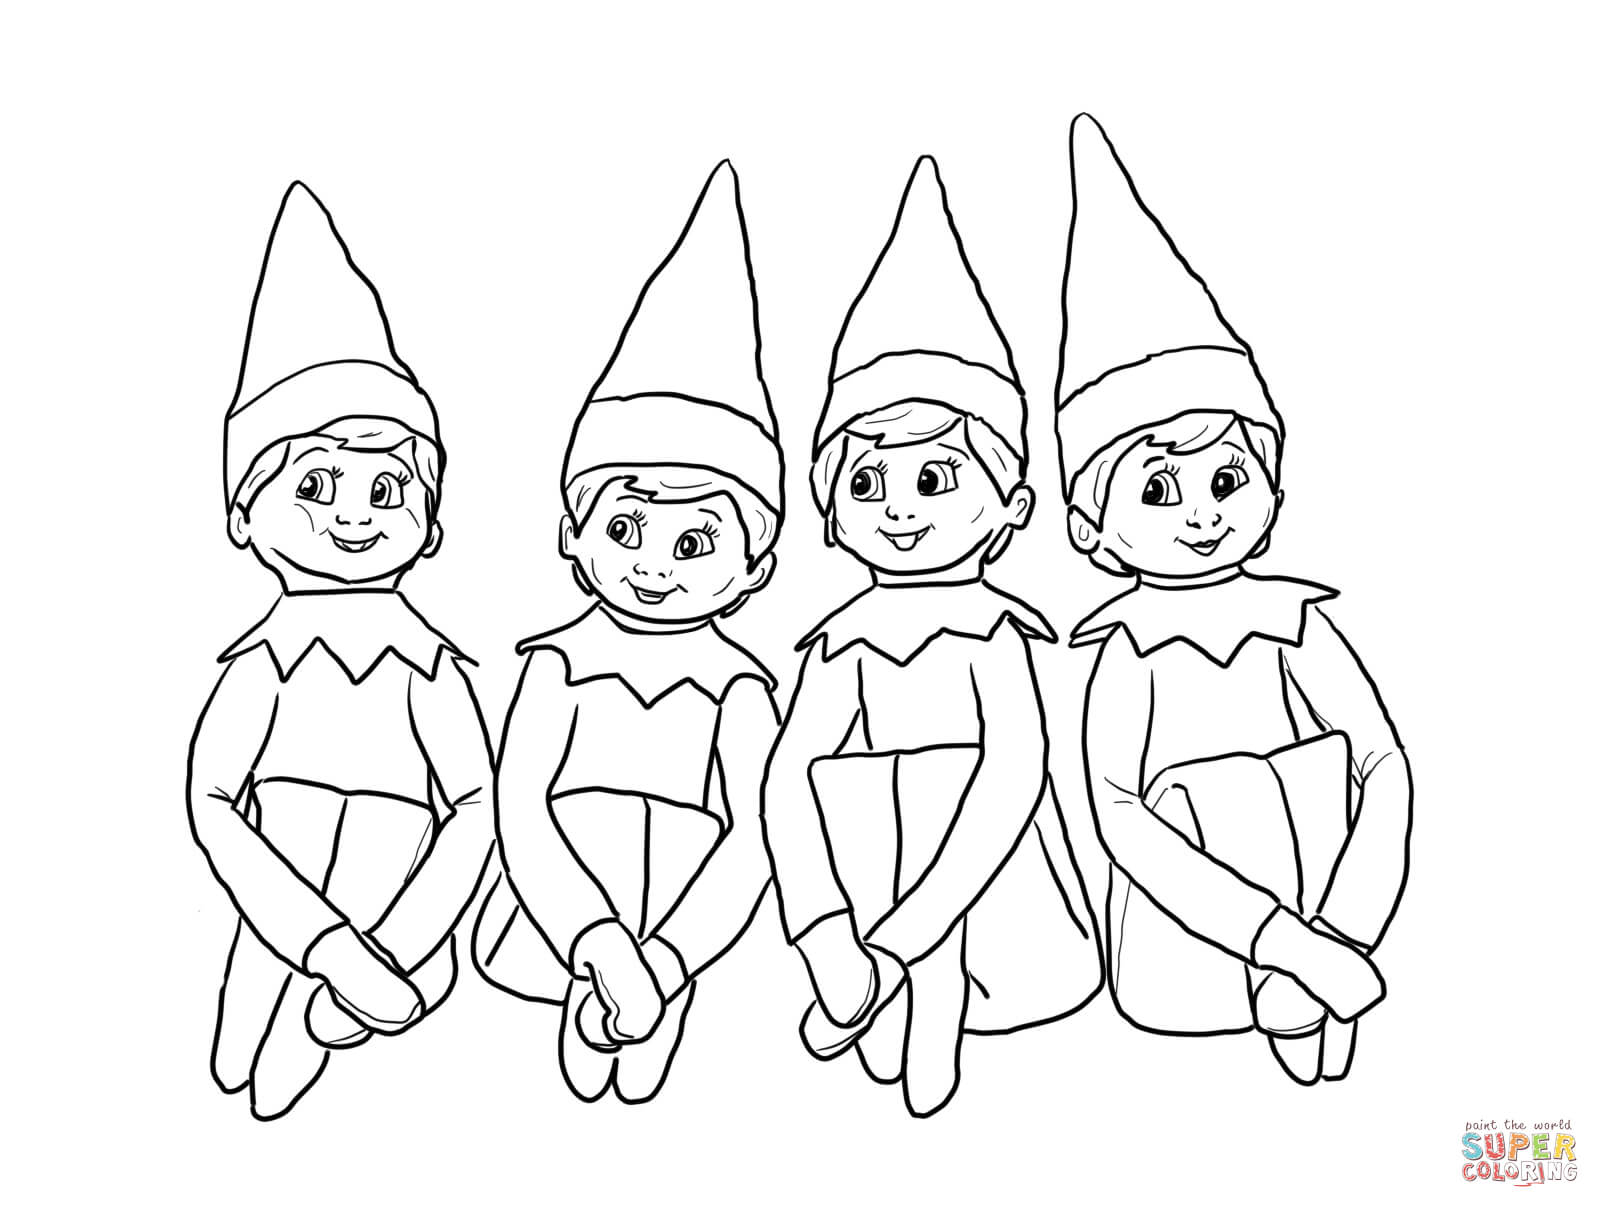 All Elf On The Shelf Coloring Pages - Coloring Pages For All Ages